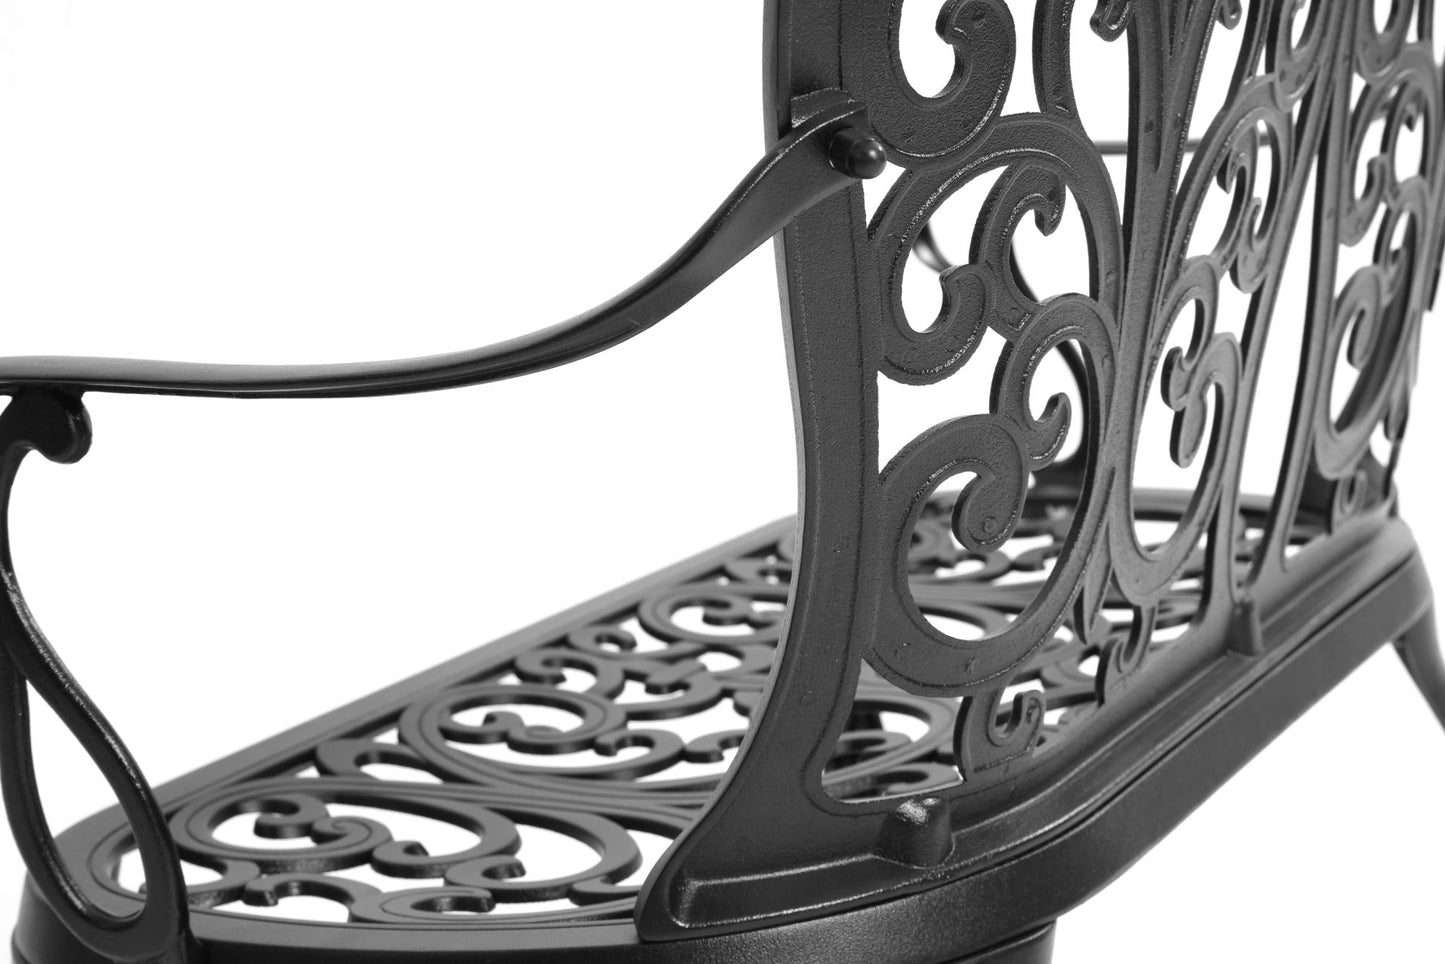 Outdoor Patio Bench All-Weather Cast Aluminum Loveseat